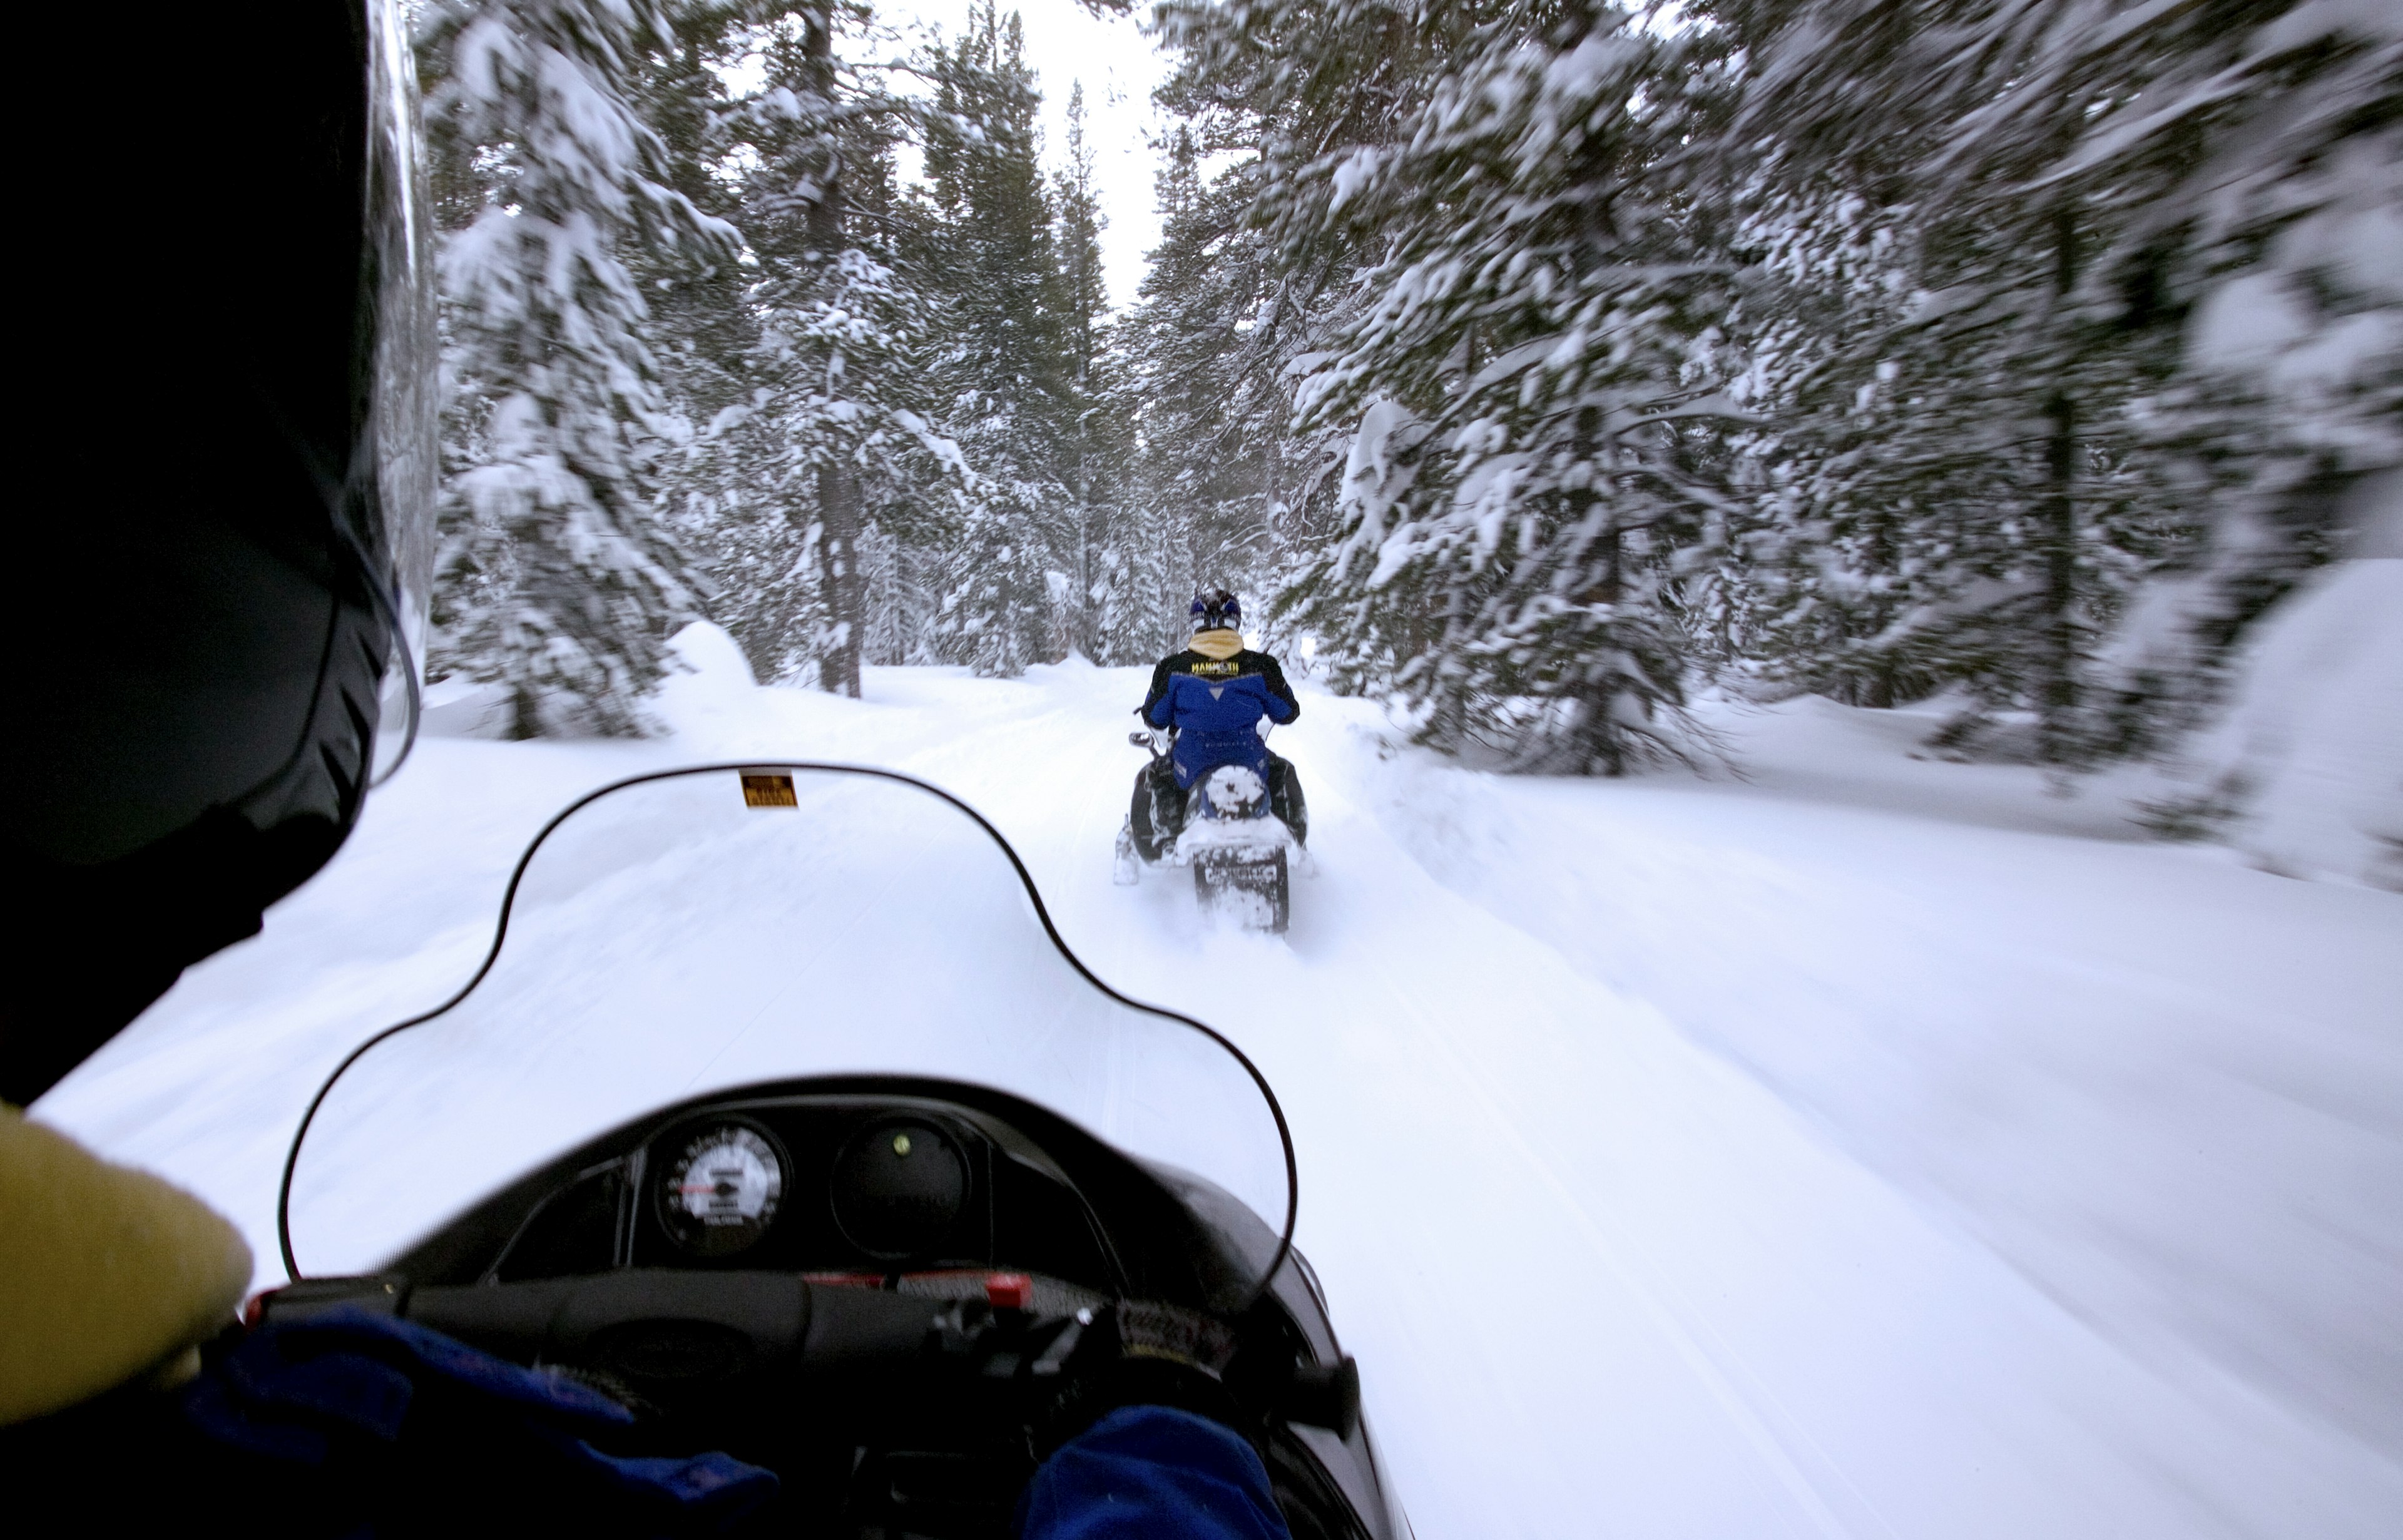 Snowmobiling in Inyo National Forest - stock photo California